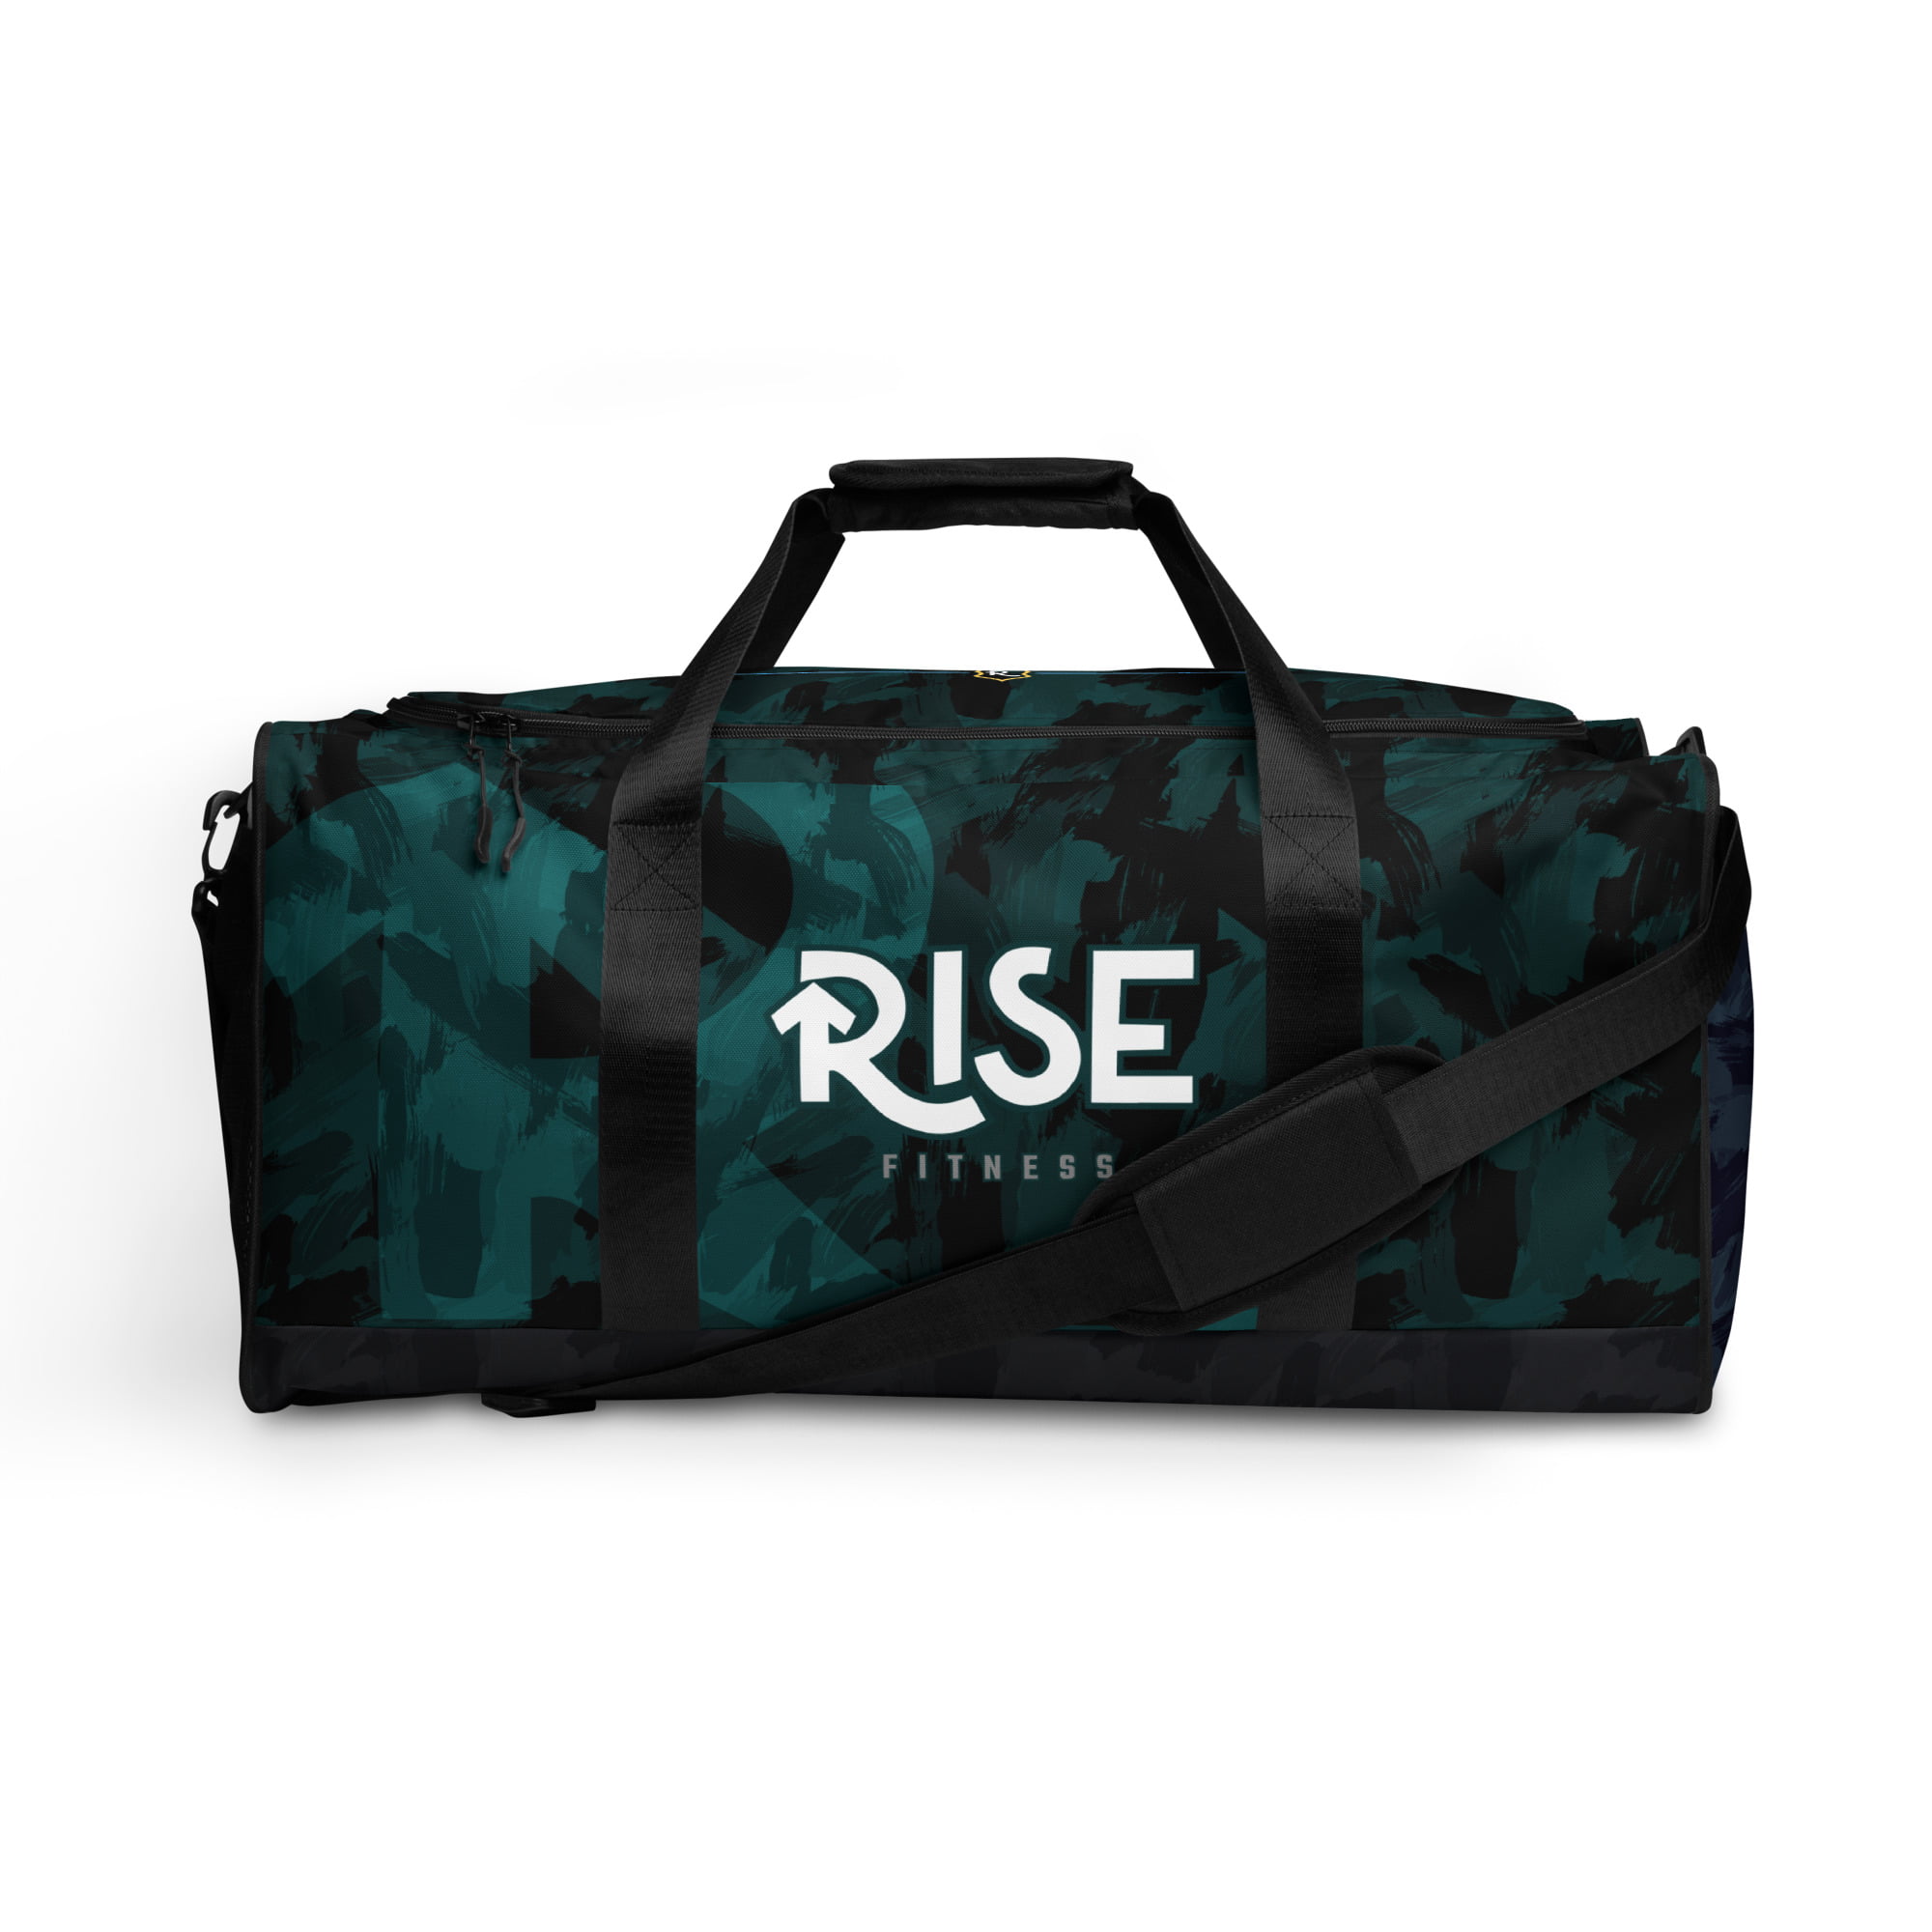 Product image for Rise Duffle bag